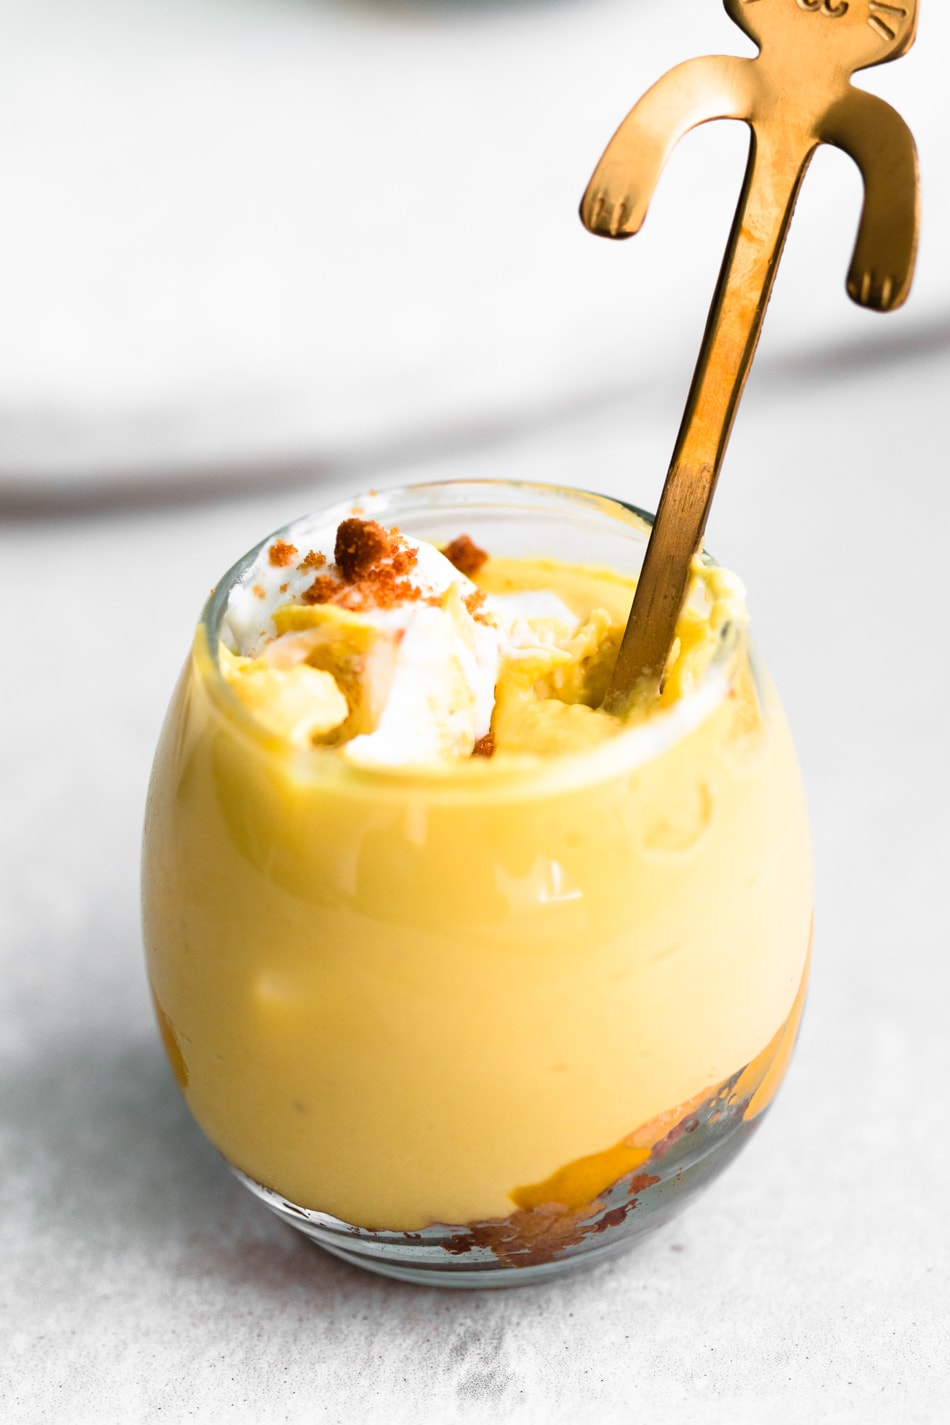 A delicious and fresh No-Bake Vegan Mango Cheesecake that tastes like summer in a cup. Refined Sugar Free, Dairy-Free and simple to make. #vegan #mango #cheesecake #dessert #dairyfree #mangocream #pudding #vegancheesecake #veganmangodesserts #dessert #crueltyfree #simple #vitamix 